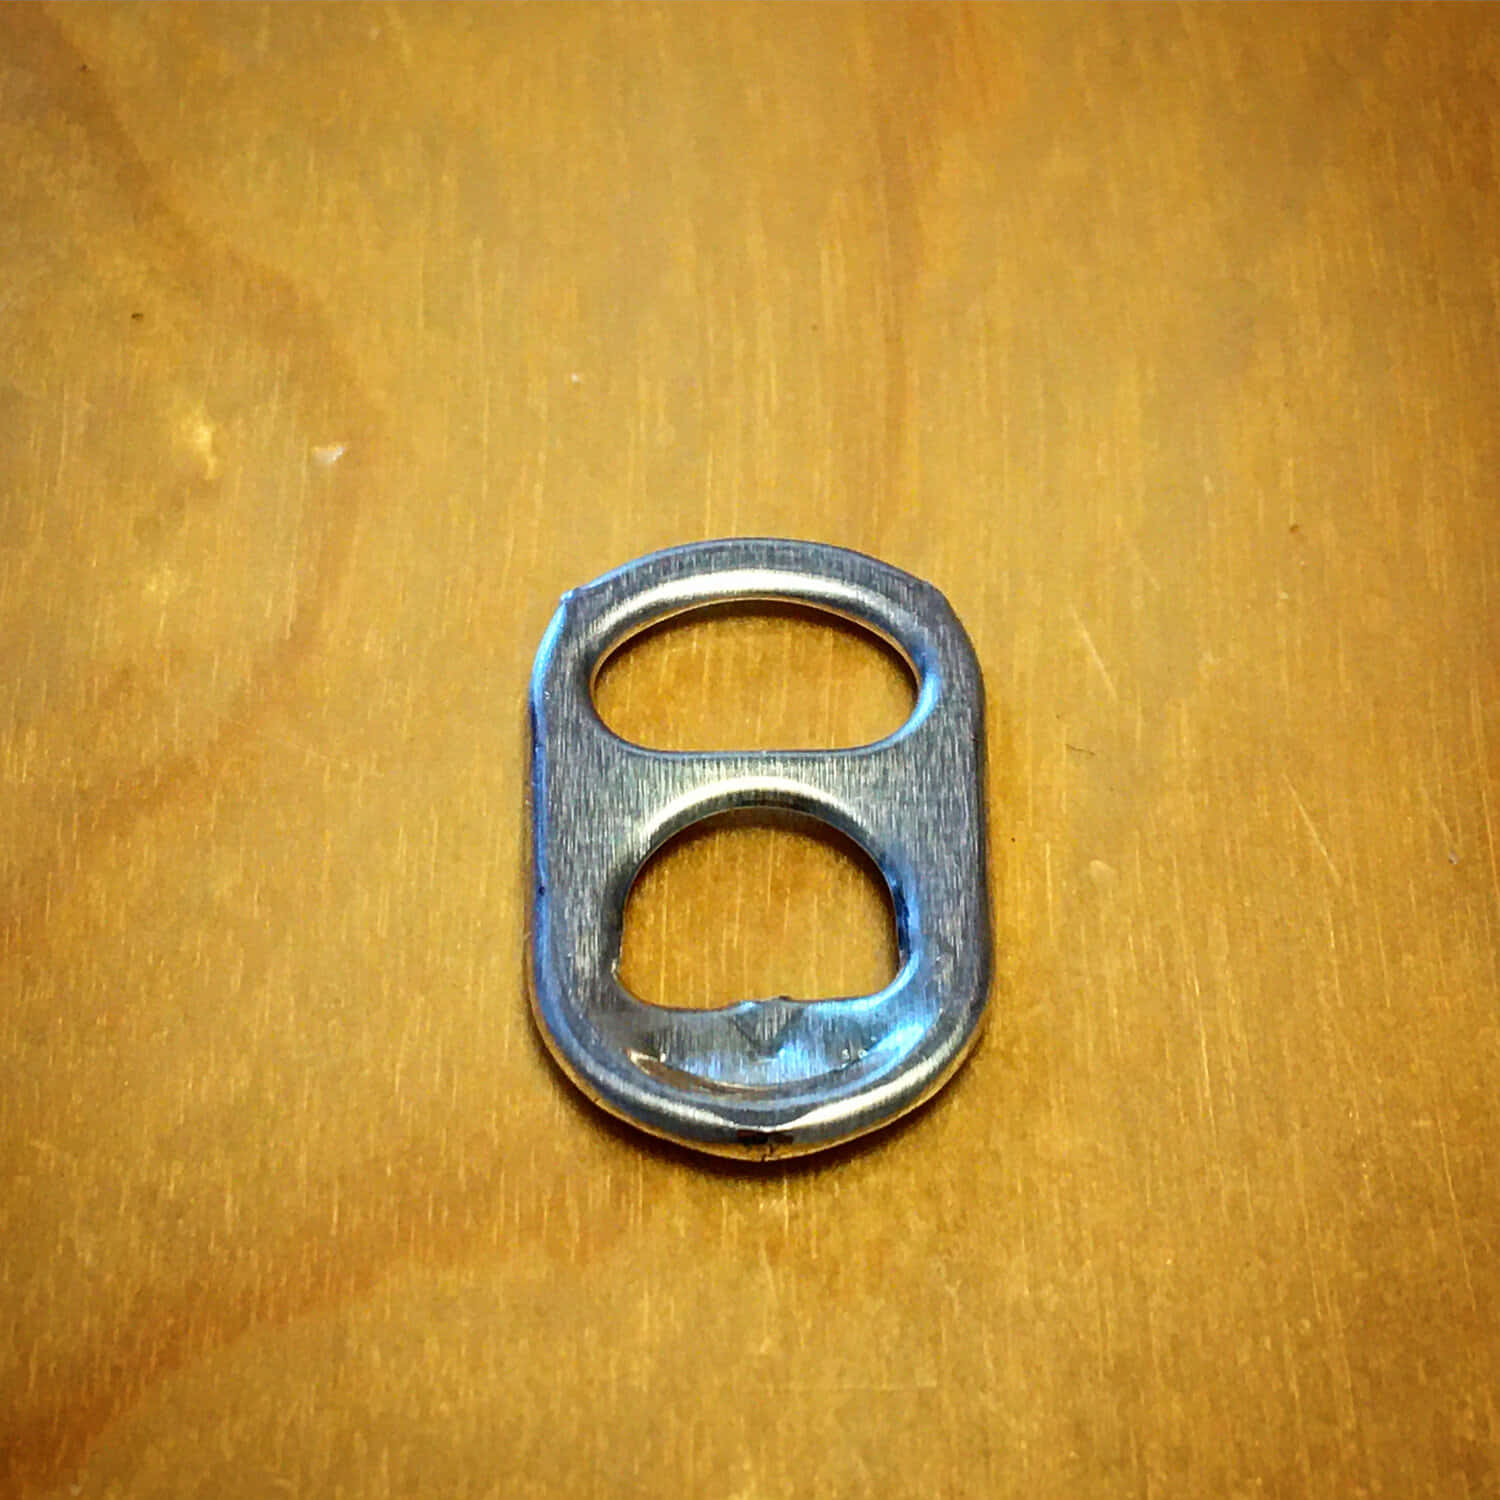 A Metal Bottle Opener On A Wooden Surface